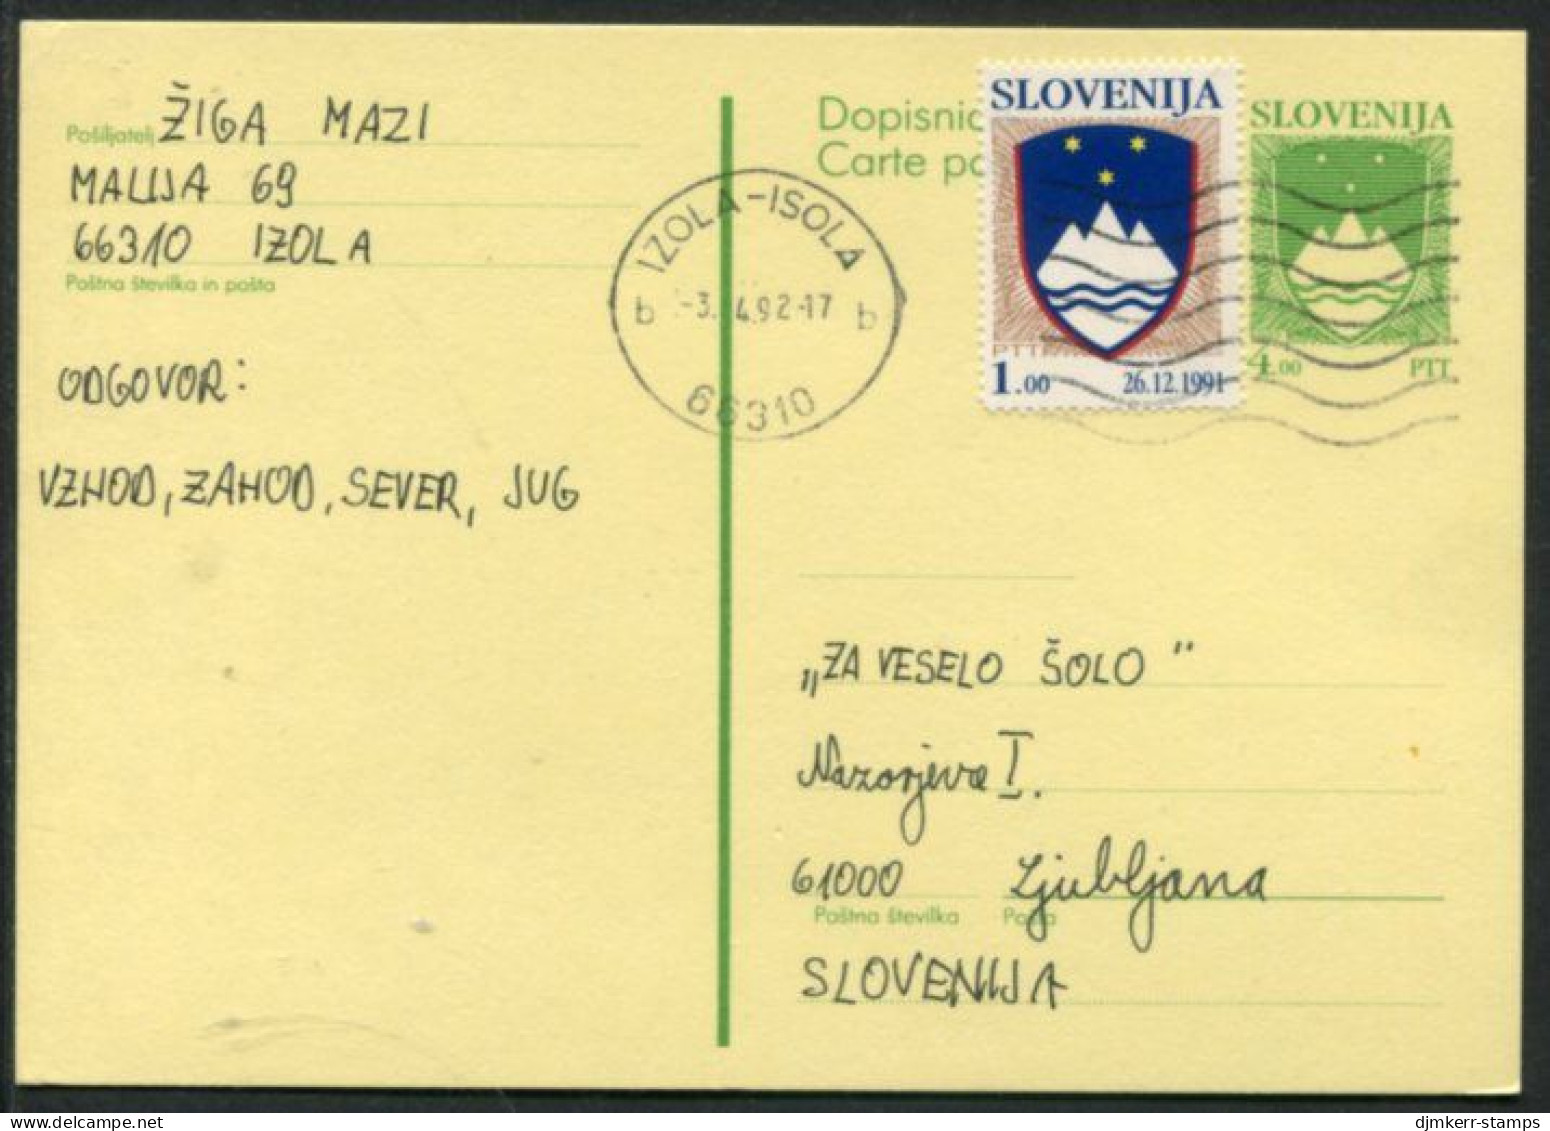 SLOVENIA 1992 4.00 T.  Arms  Stationery Card, Used With Additional 1 T. Stamp.  Michel P1 - Eslovenia